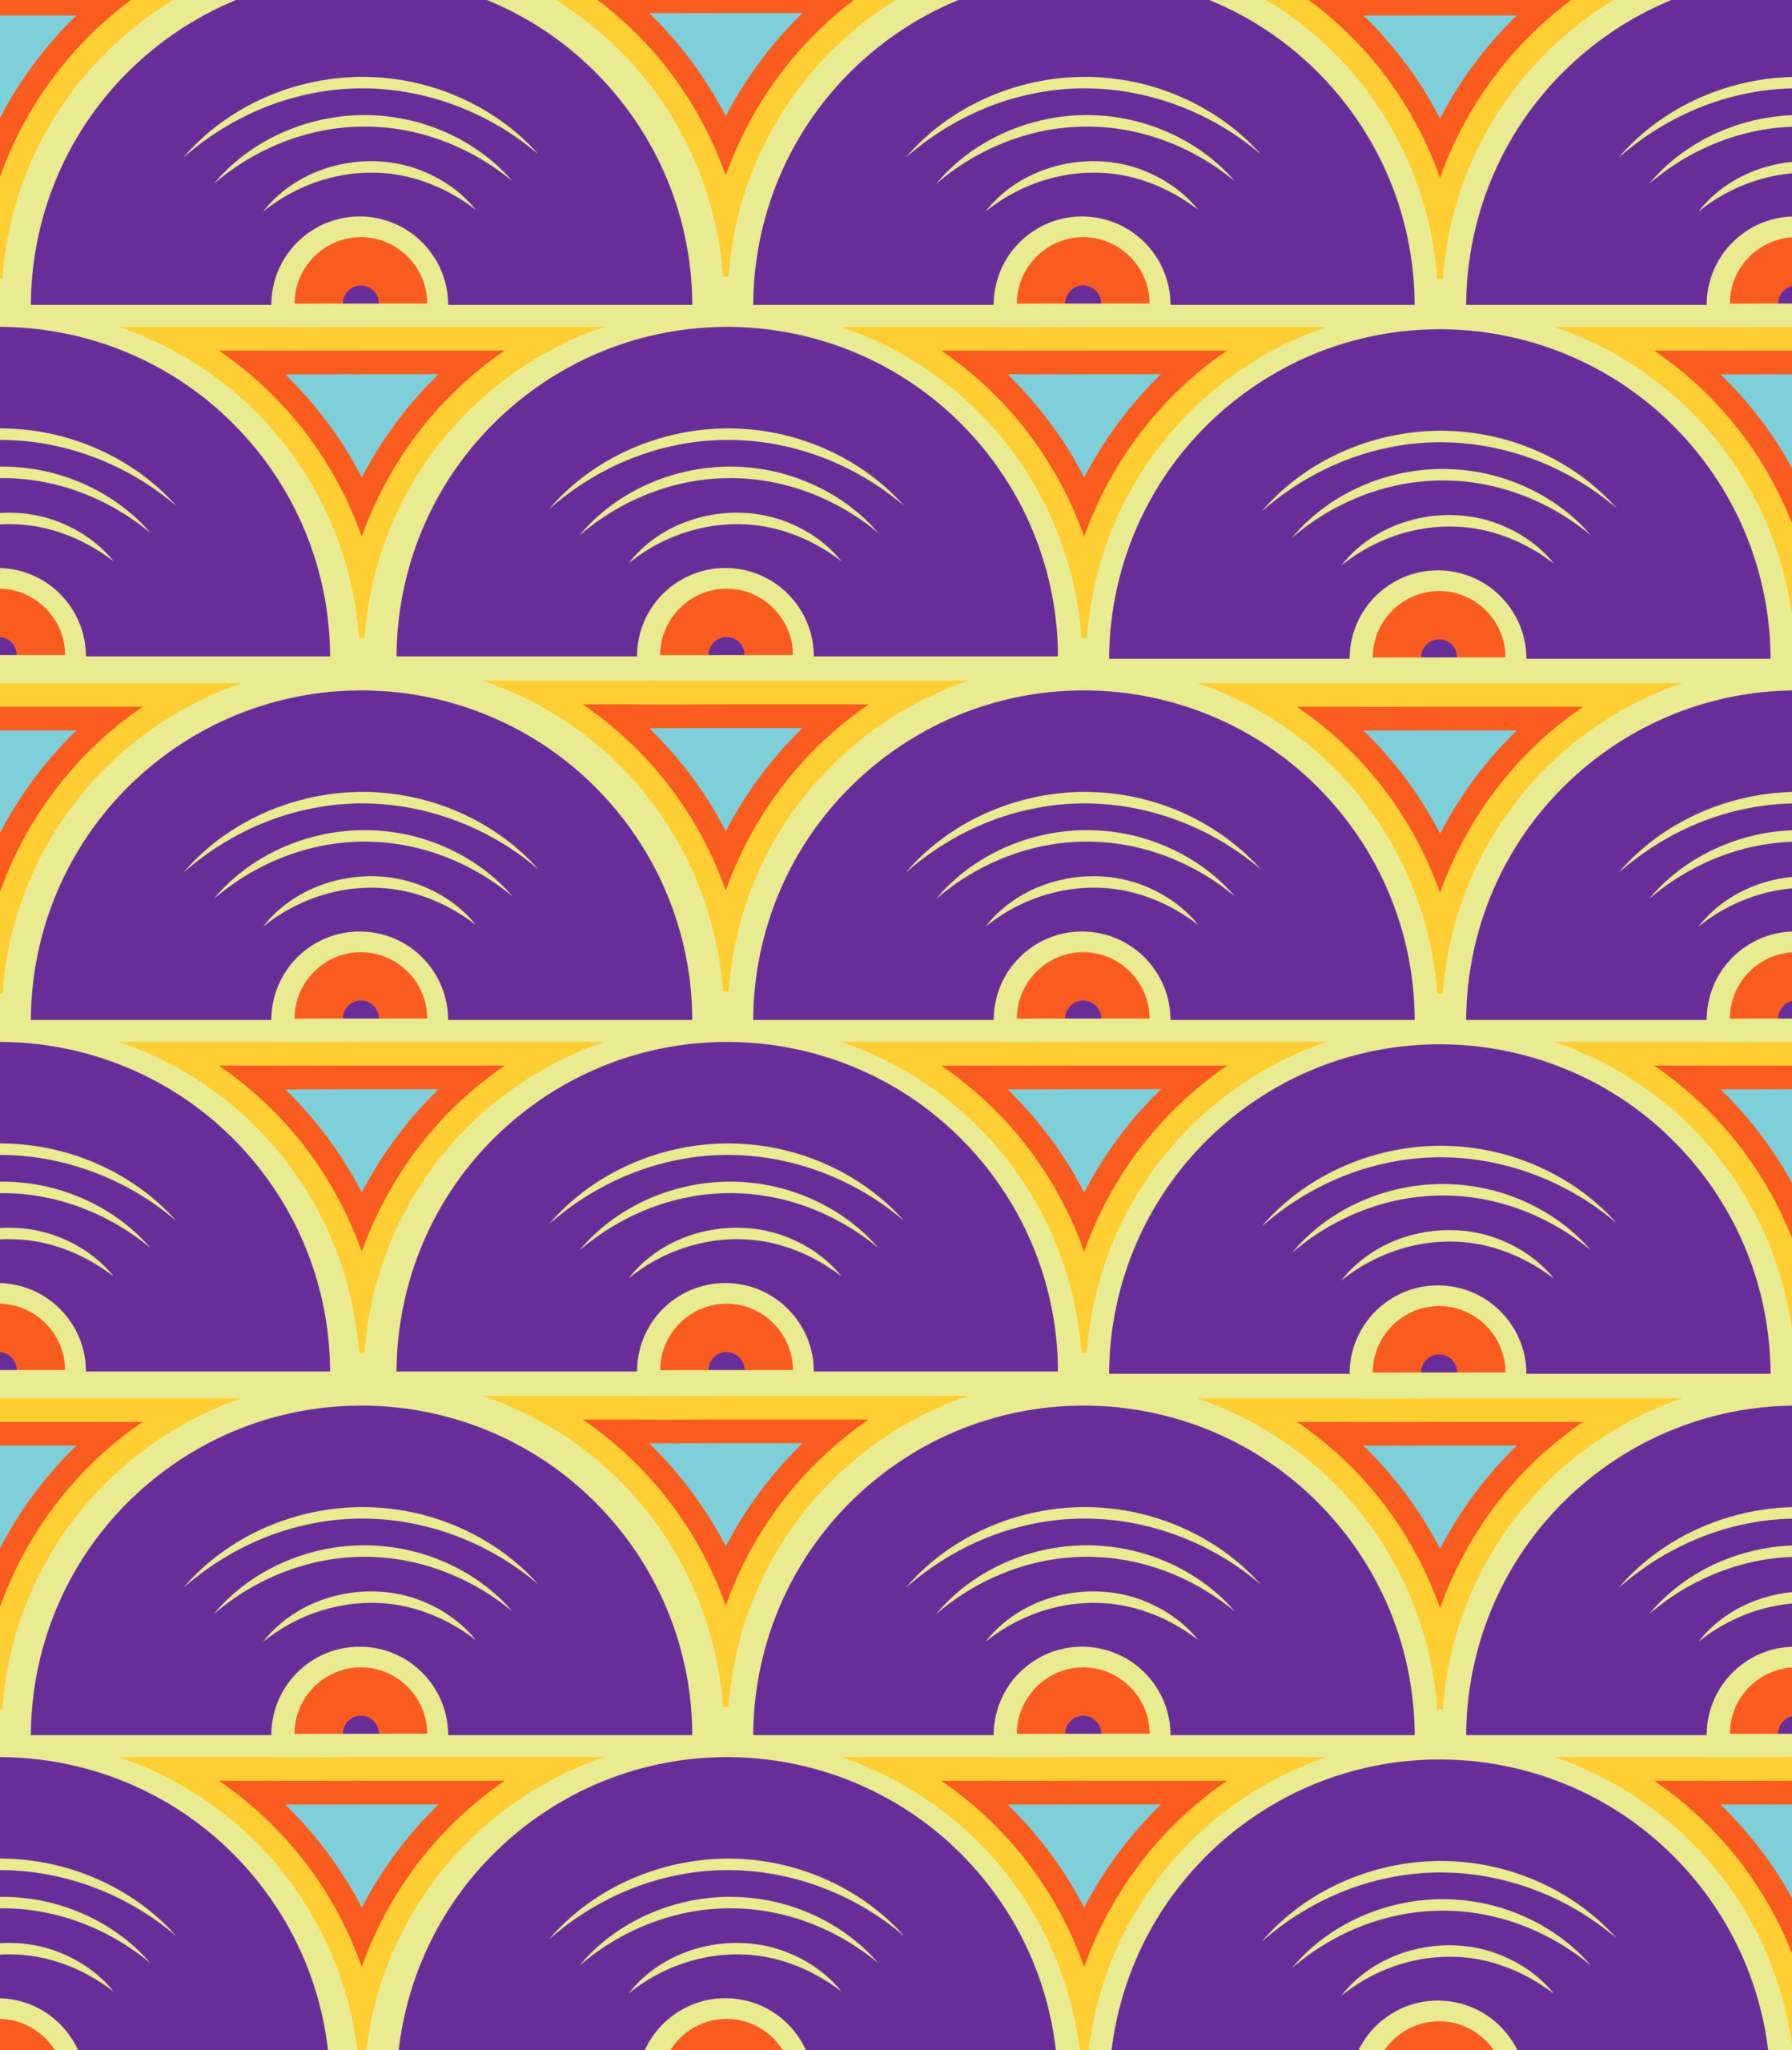 A geometric pattern created by lines of purple records and with orange and yellow triangles filling in the negative spaces.